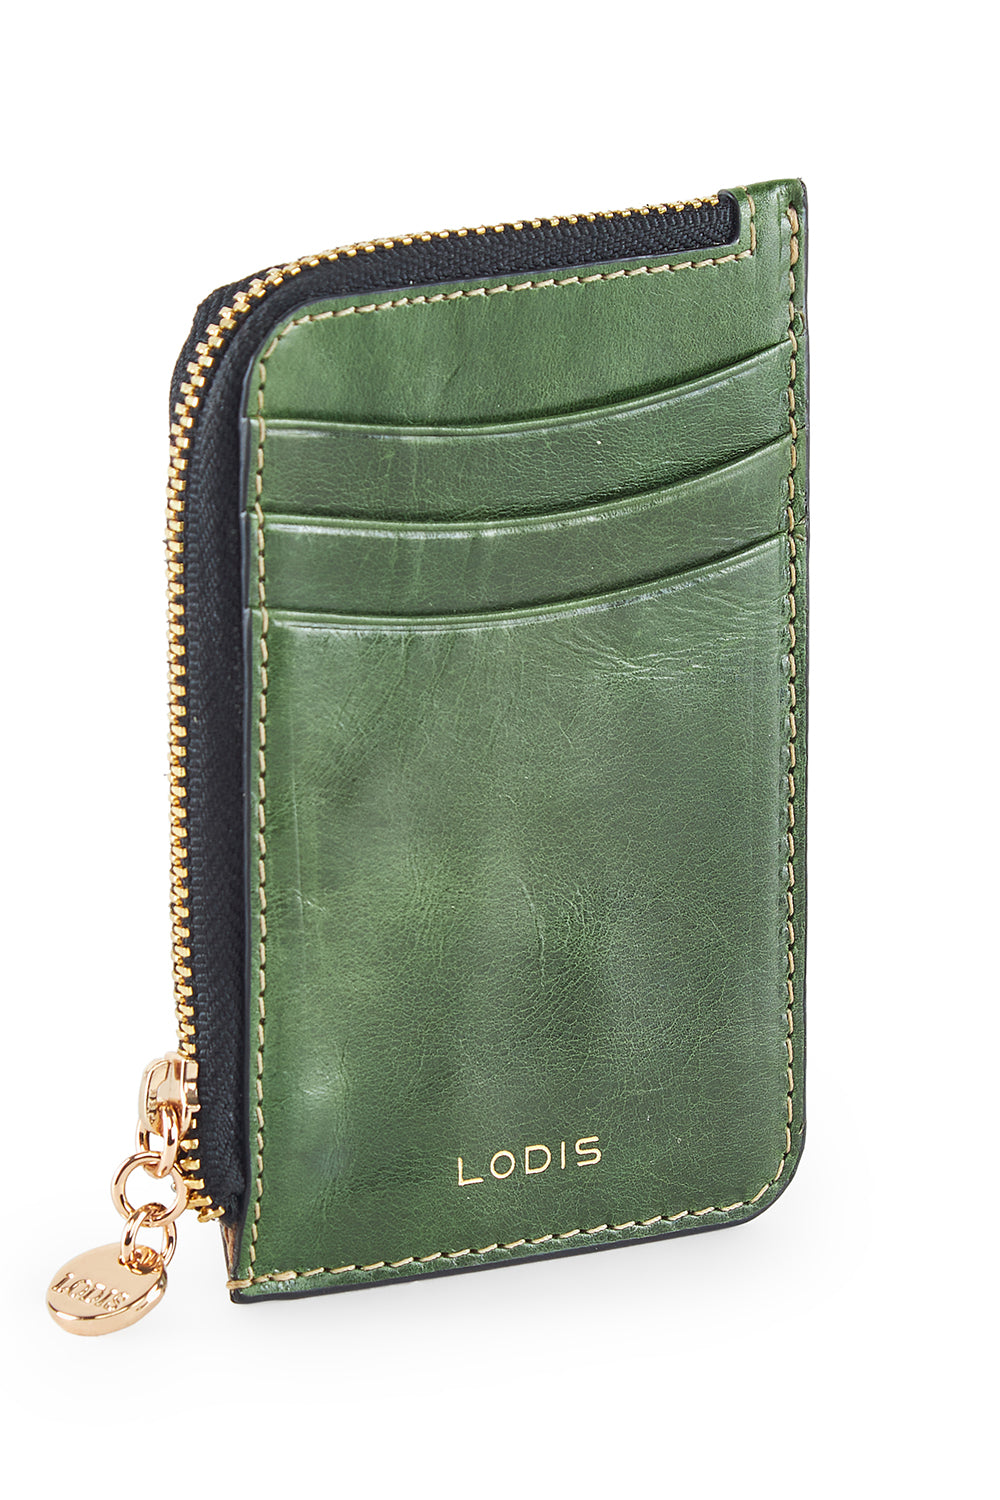  Shop Now the Sleek Ruga Leather Card and Coin Case | Lodis 